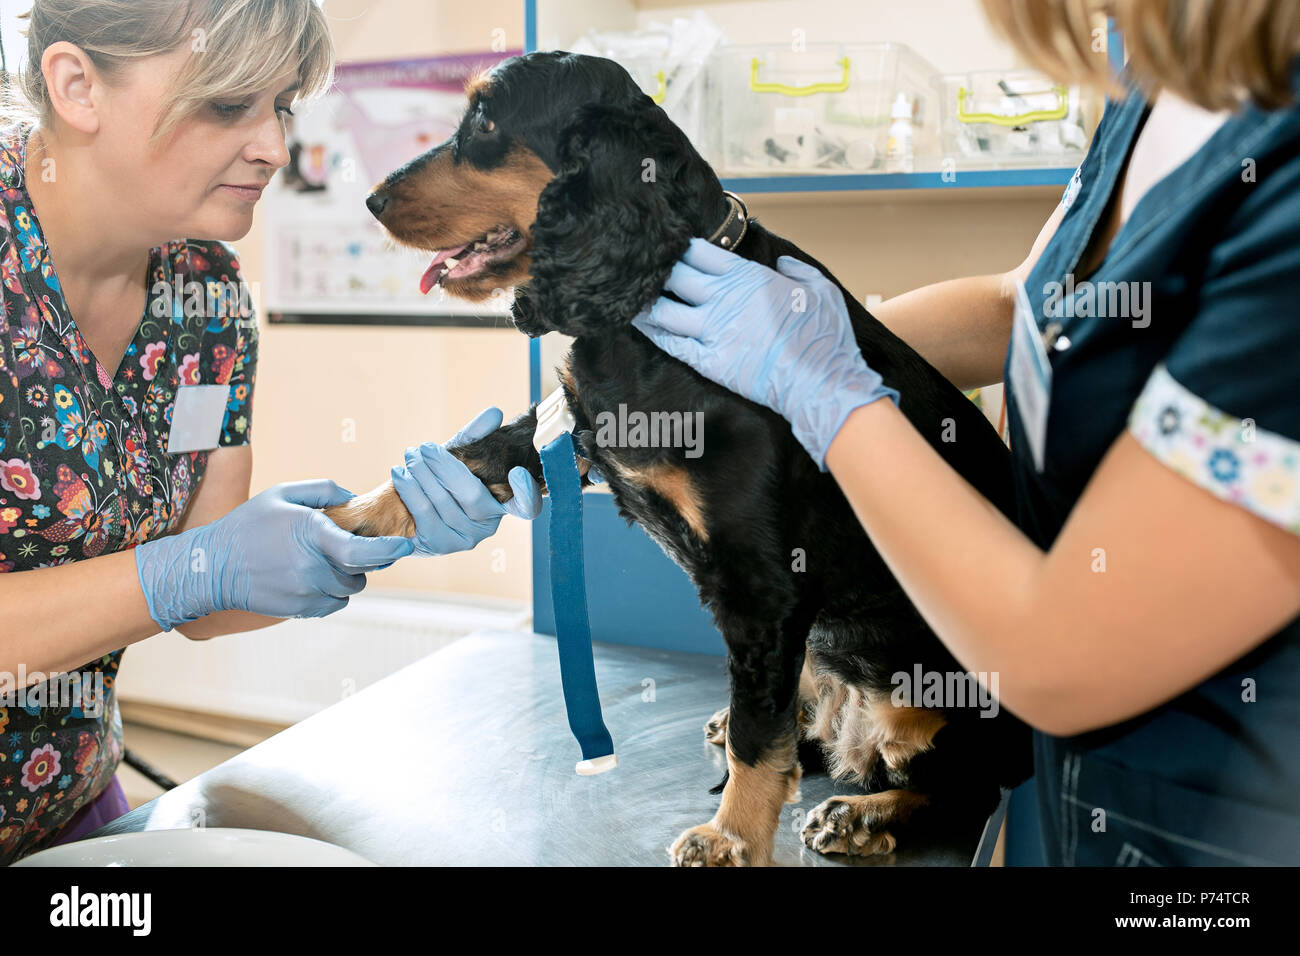 52 HQ Images Pet Care Vet Clinic - Pet Care Veterinary Vector Photo Free Trial Bigstock